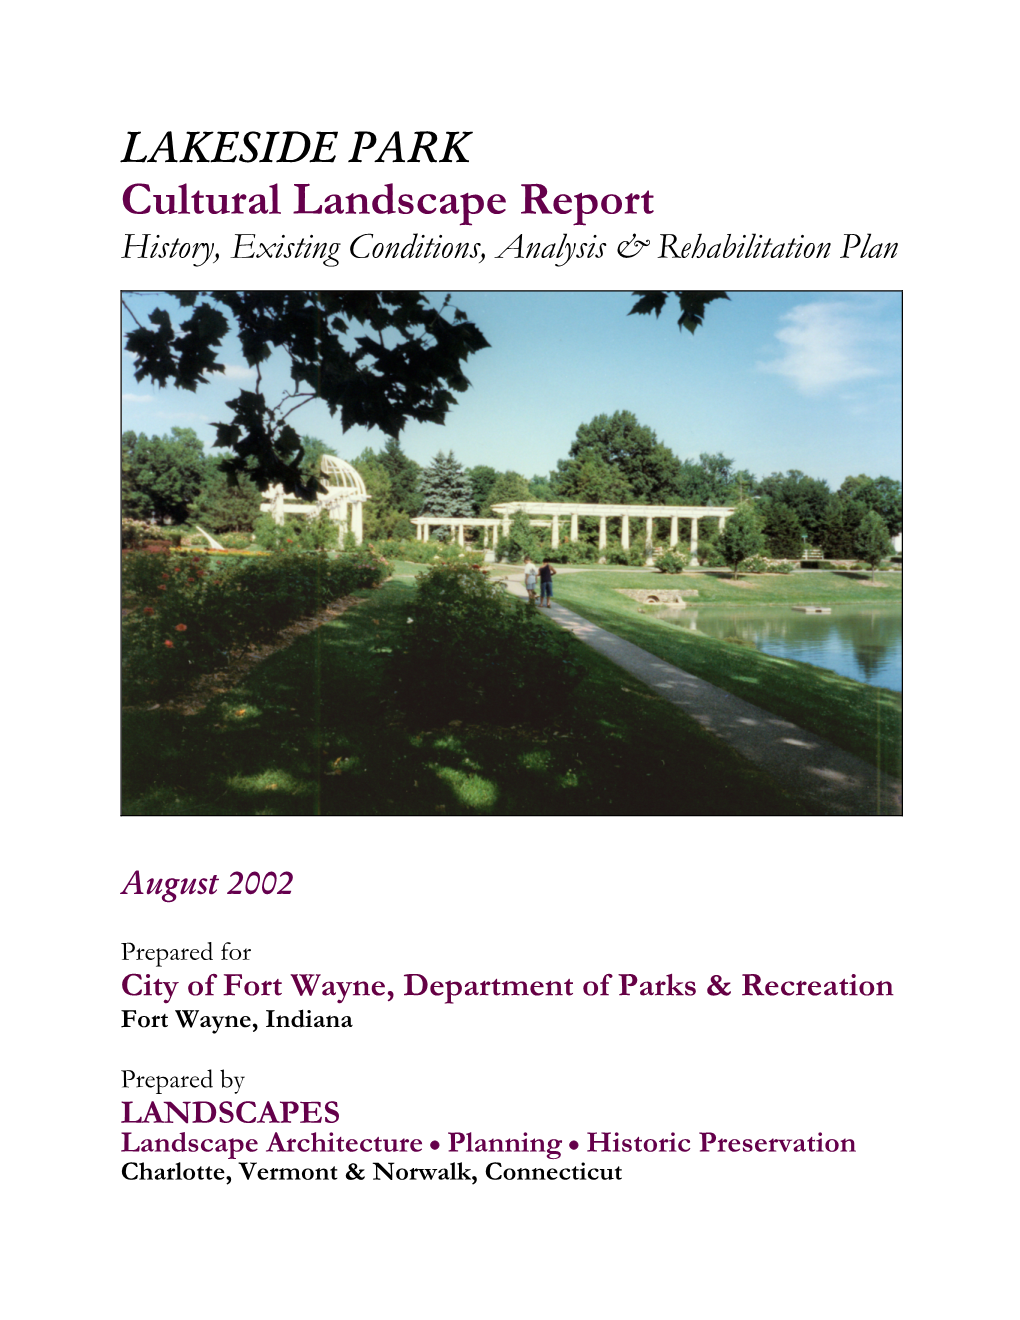 LAKESIDE PARK Cultural Landscape Report History, Existing Conditions, Analysis & Rehabilitation Plan